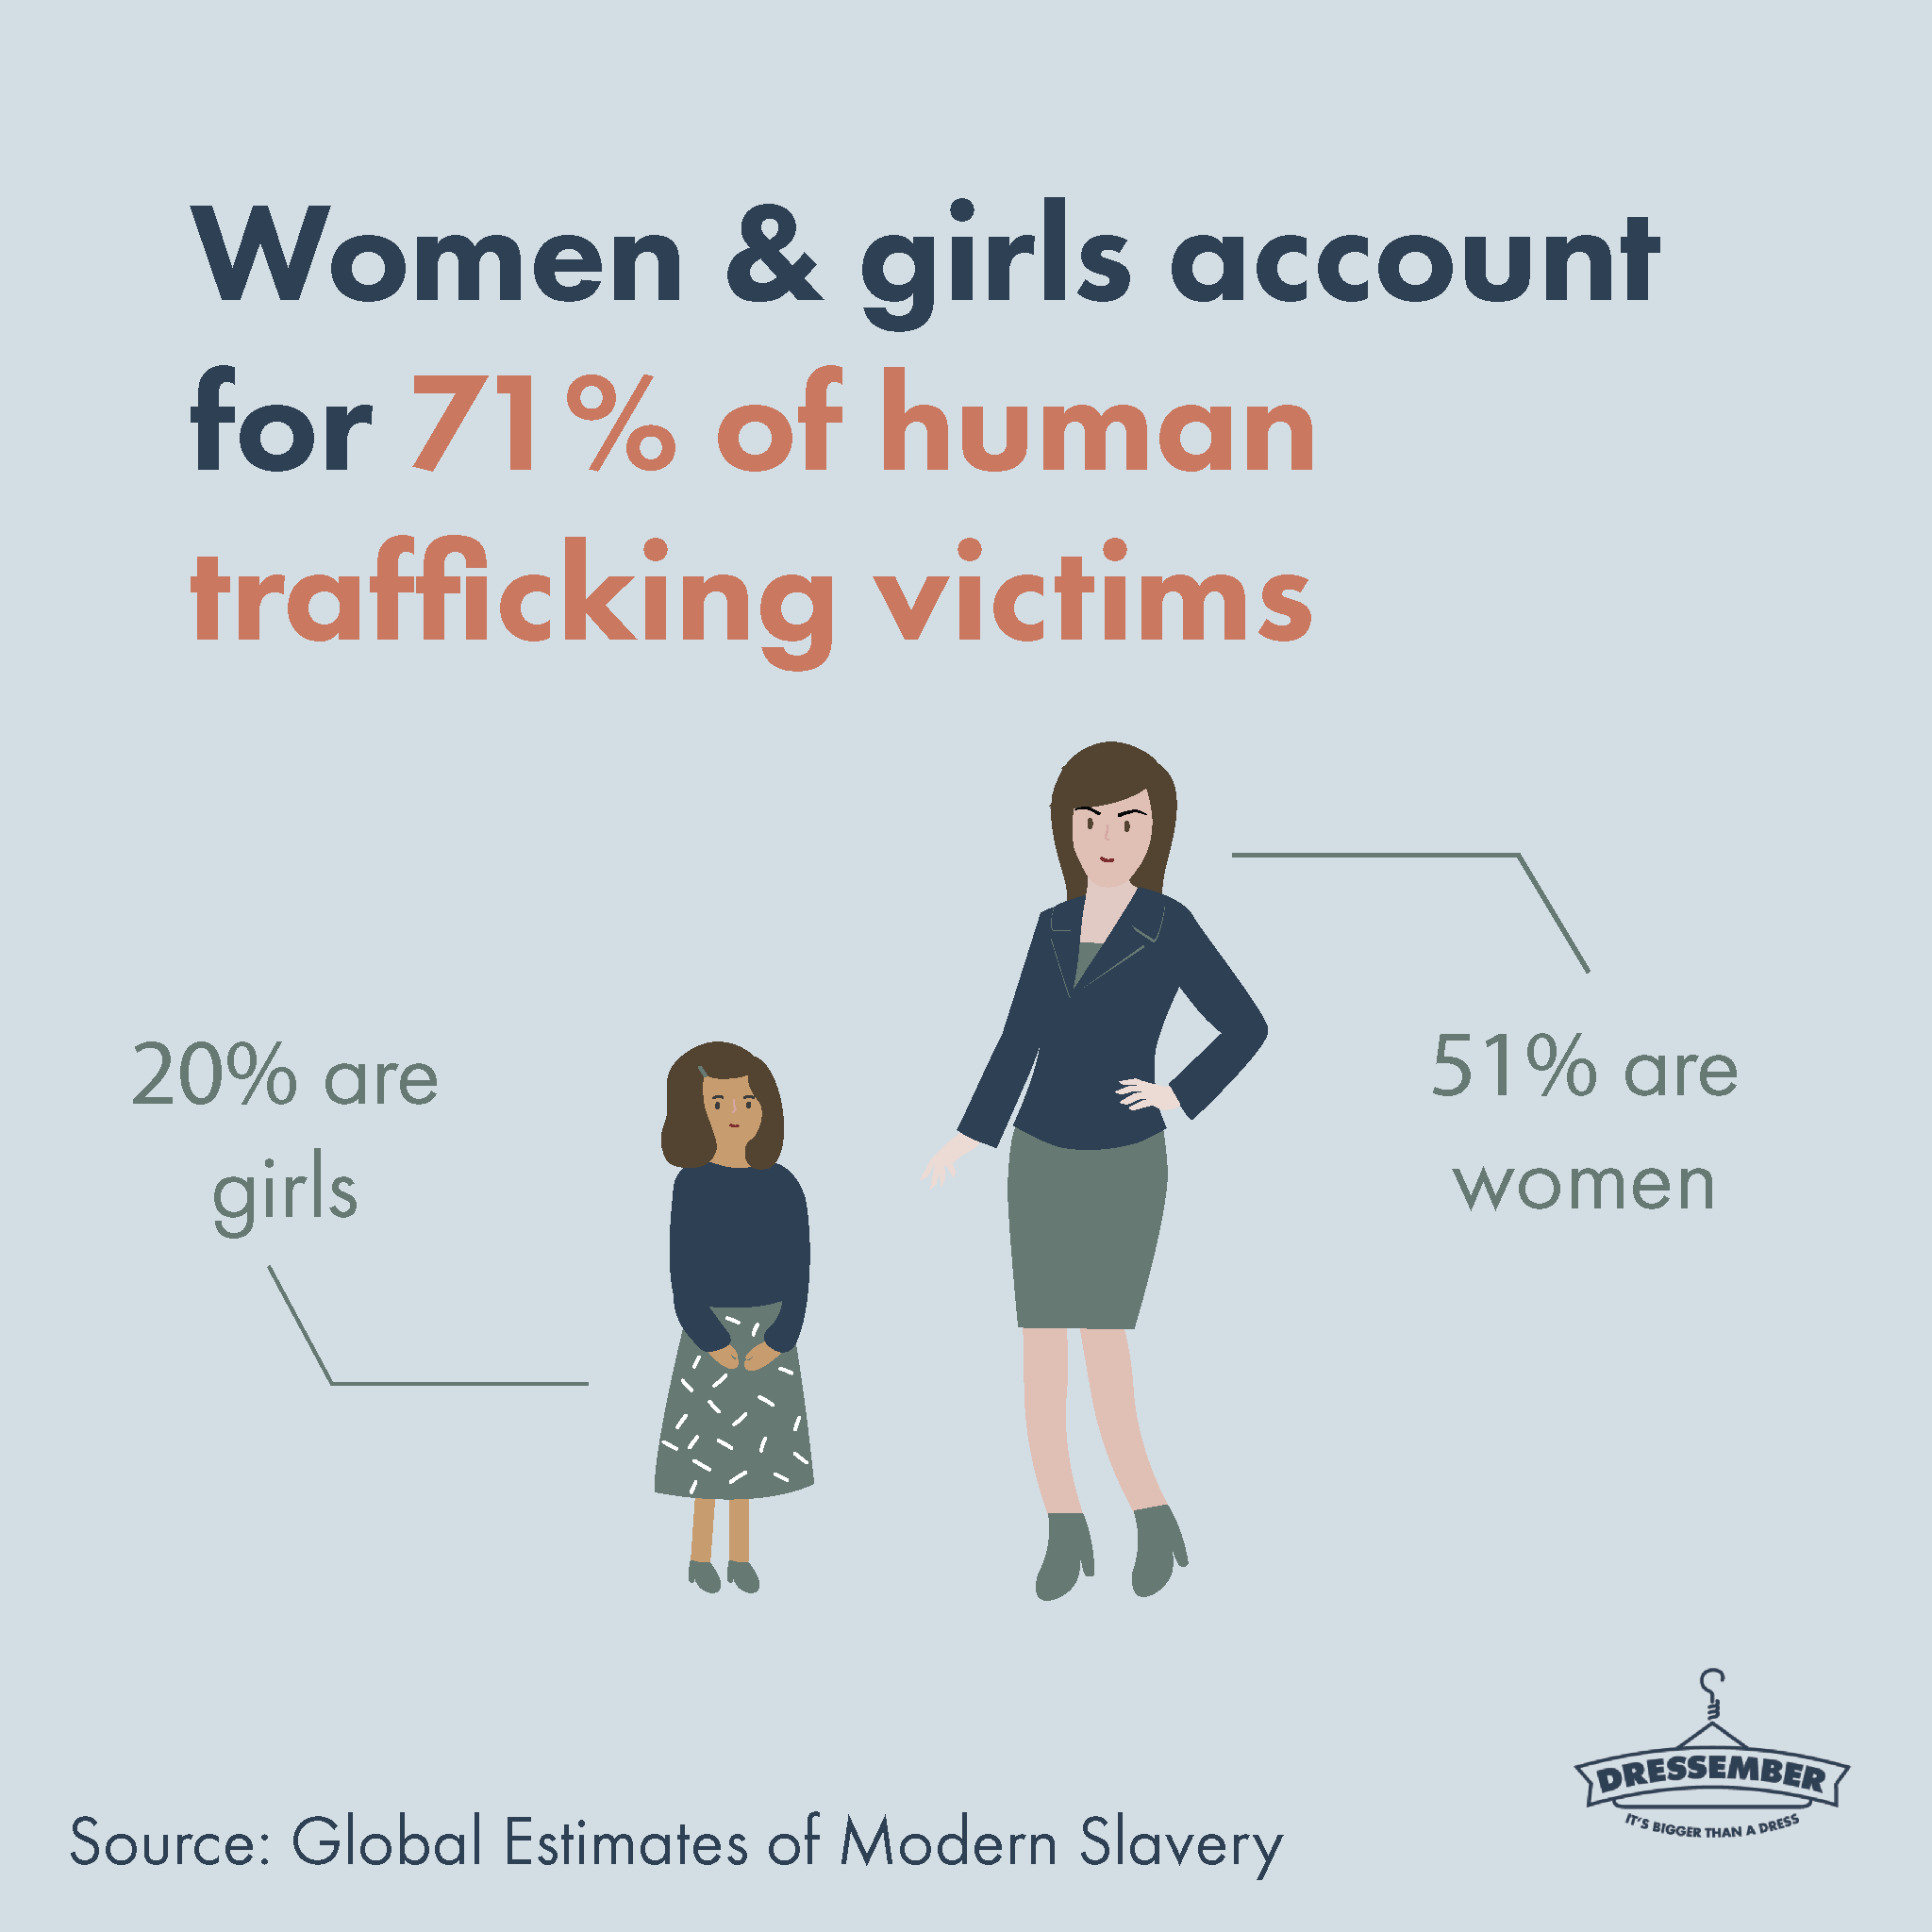 Why are women more likely to be impacted by human trafficking?